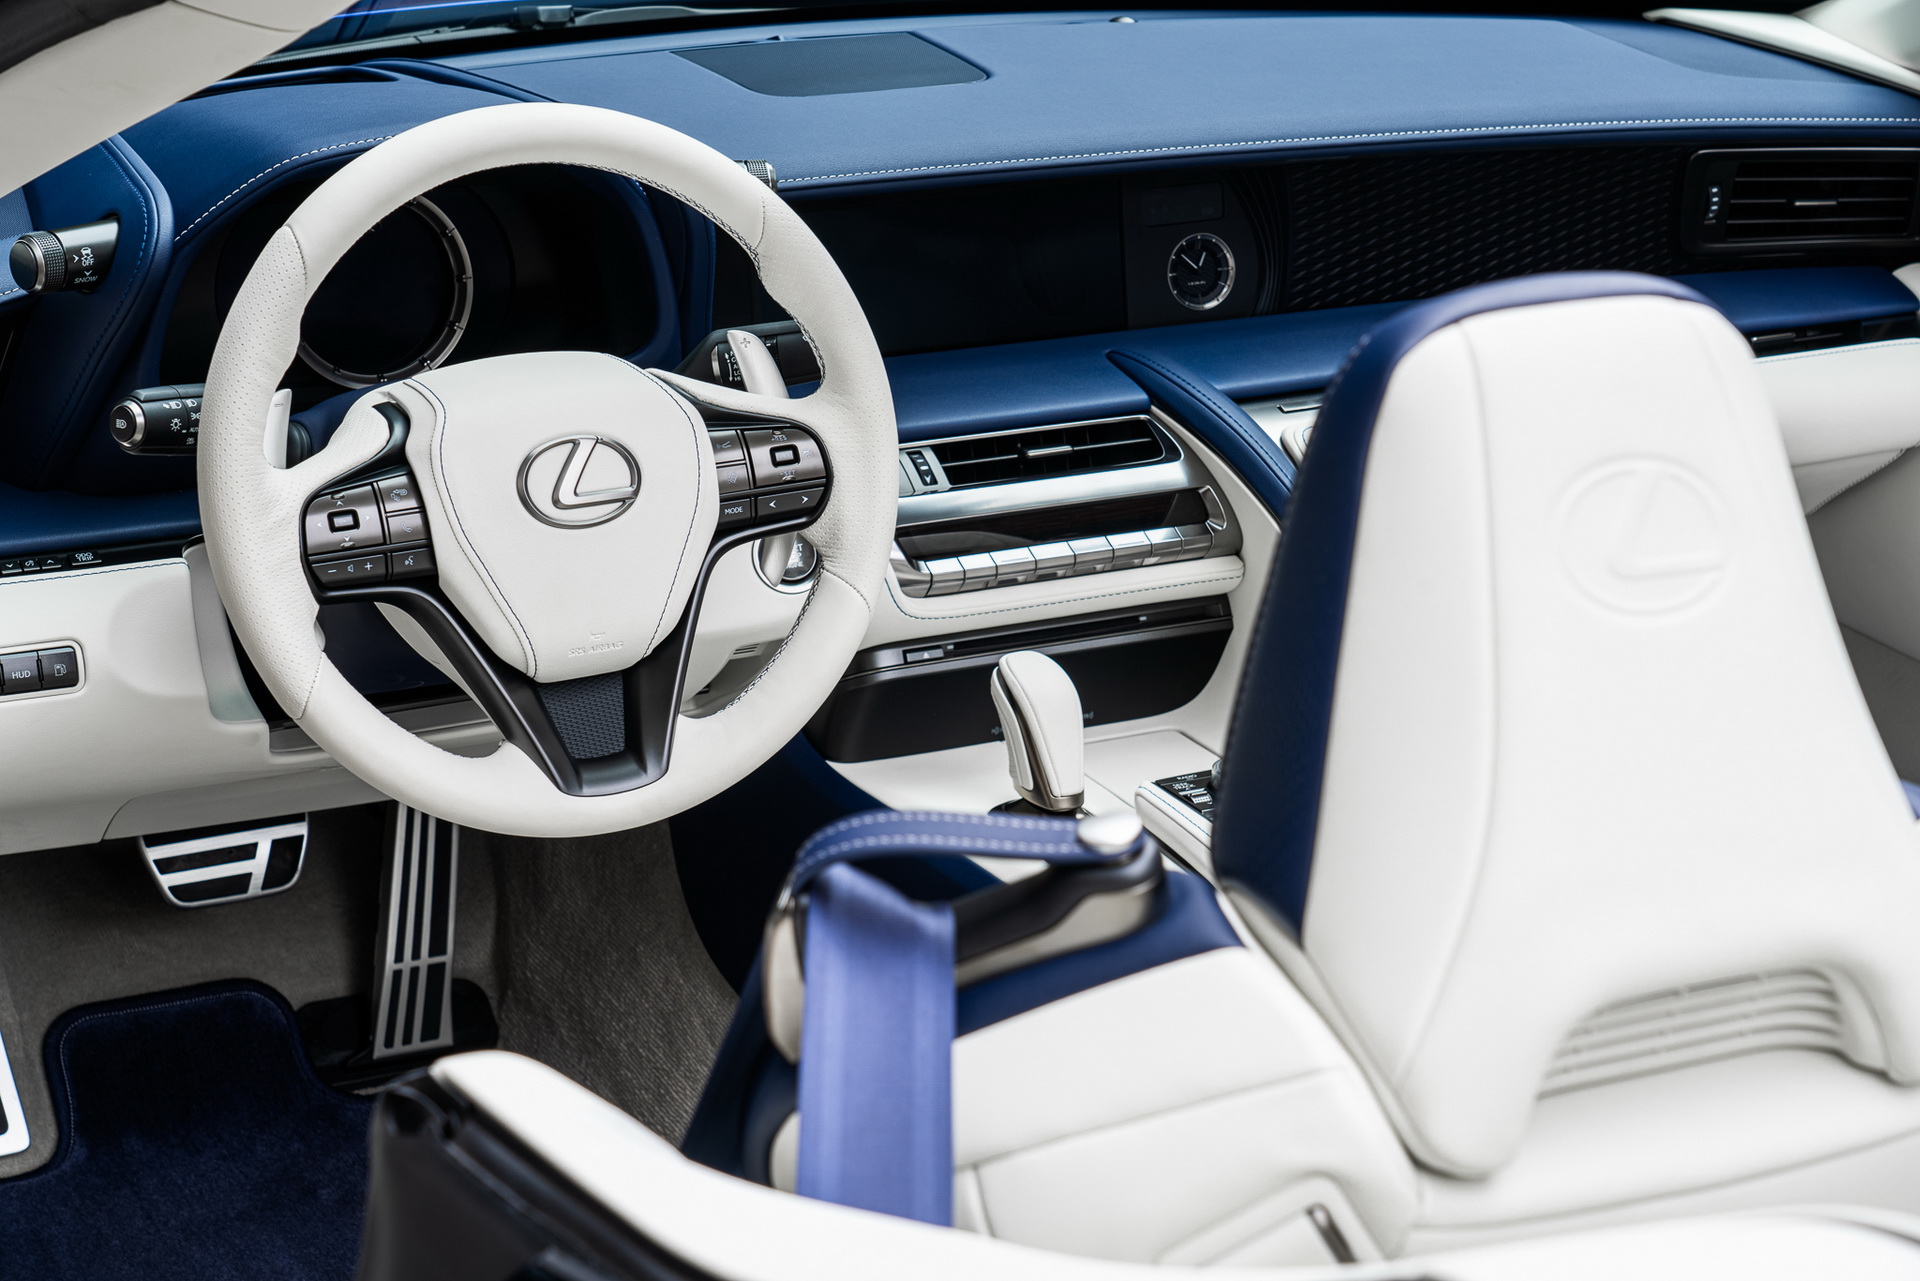 2021 Lexus Lc 500 Convertible Regatta Edition Is Only For Europe Carscoops